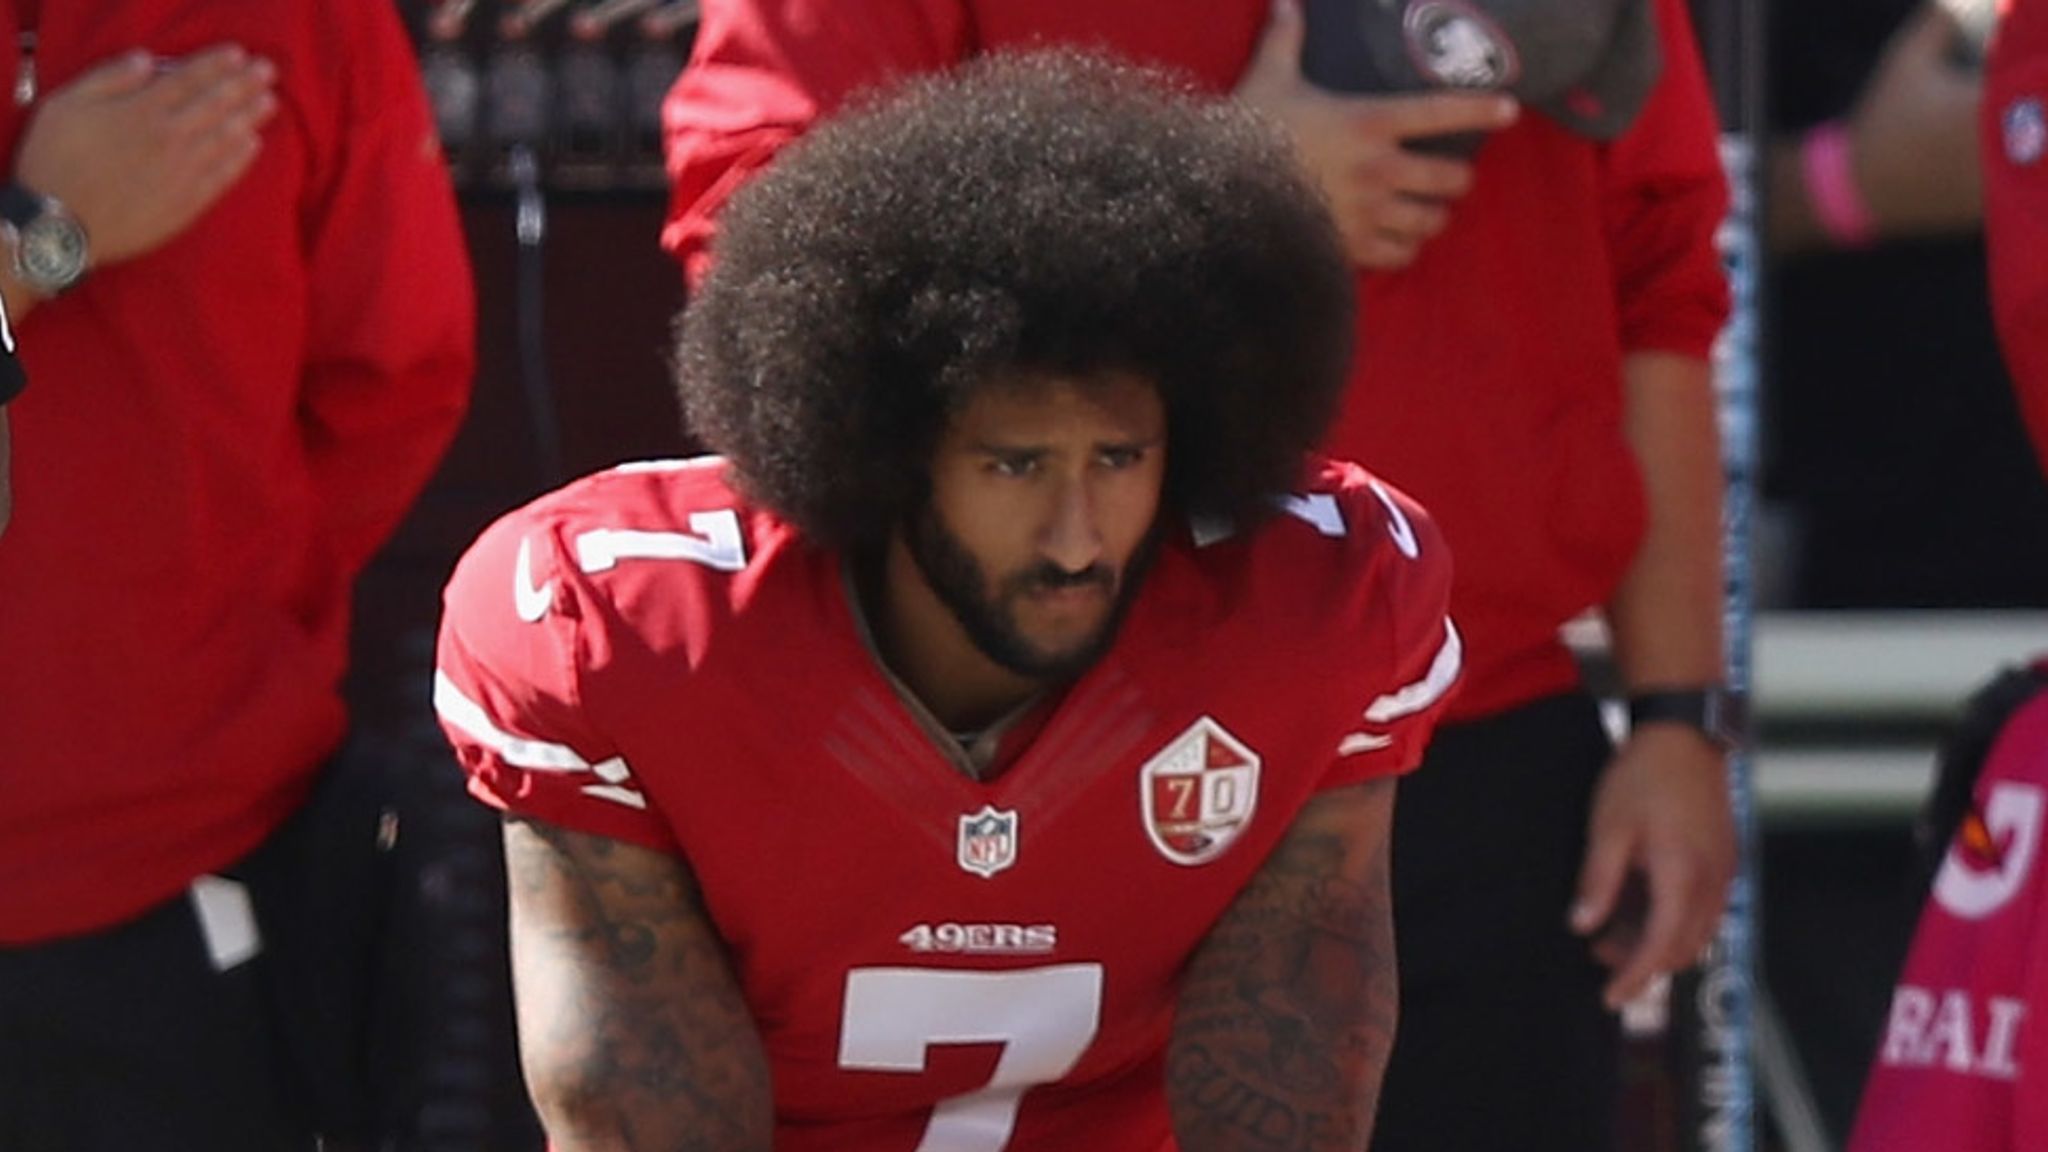 Former 49ers Quarterback Colin Kaepernick taking a knee during the national anthem "pictured here"